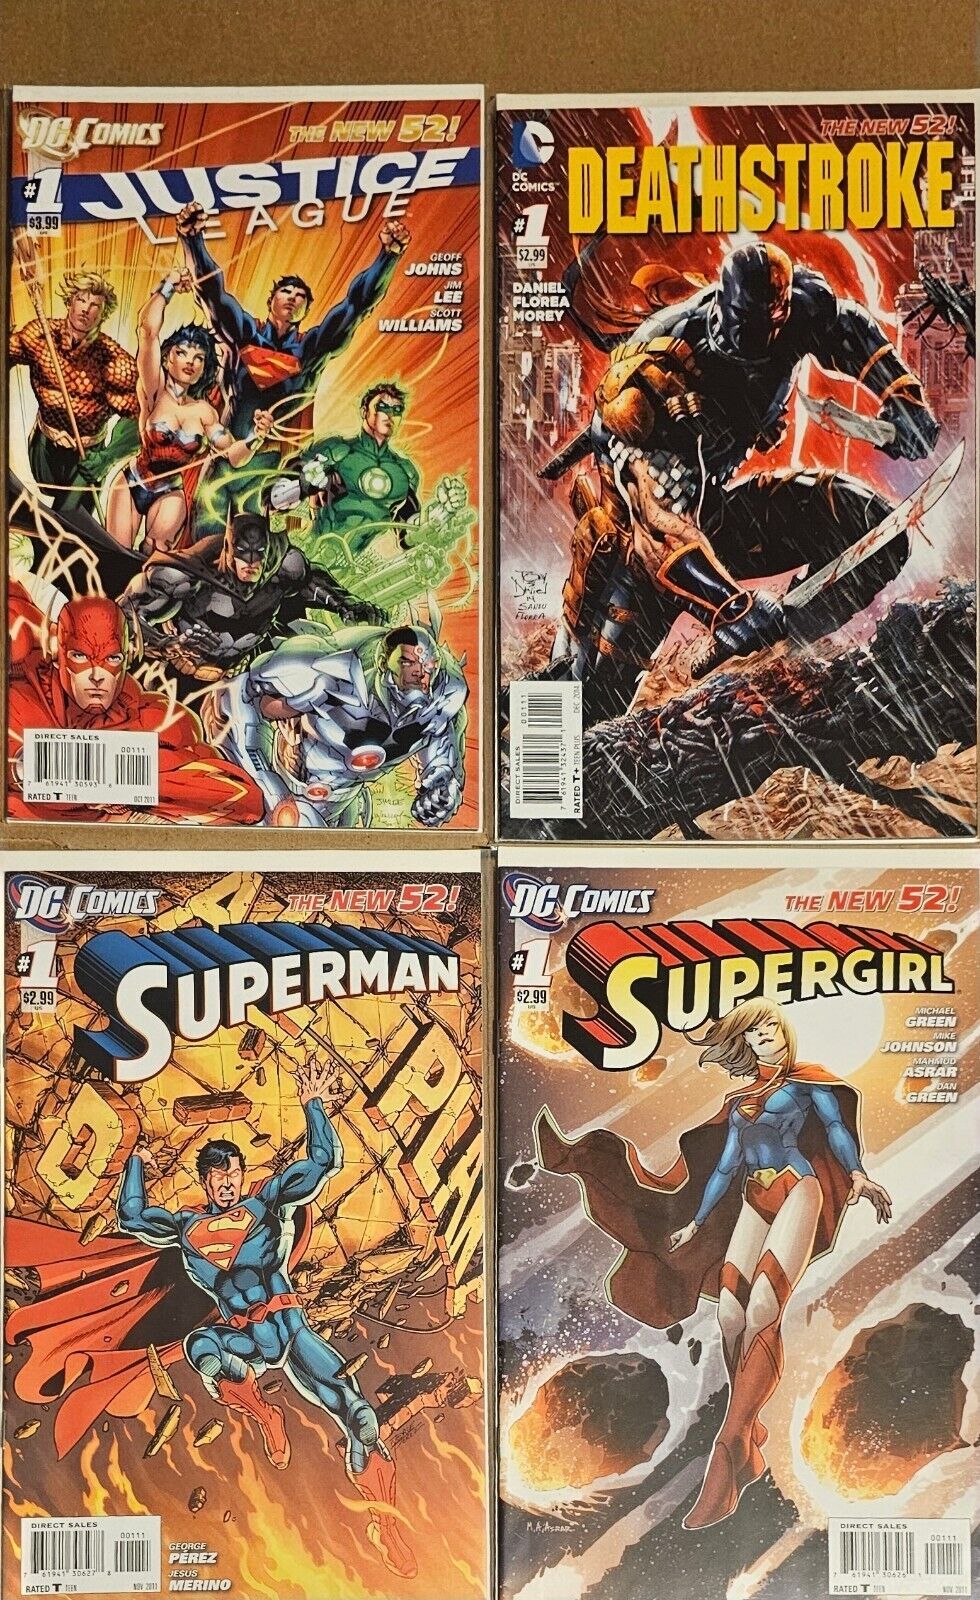  New 52 Superman #1 Deathstroke #1 Justice League #1  Super Girl first prints DC